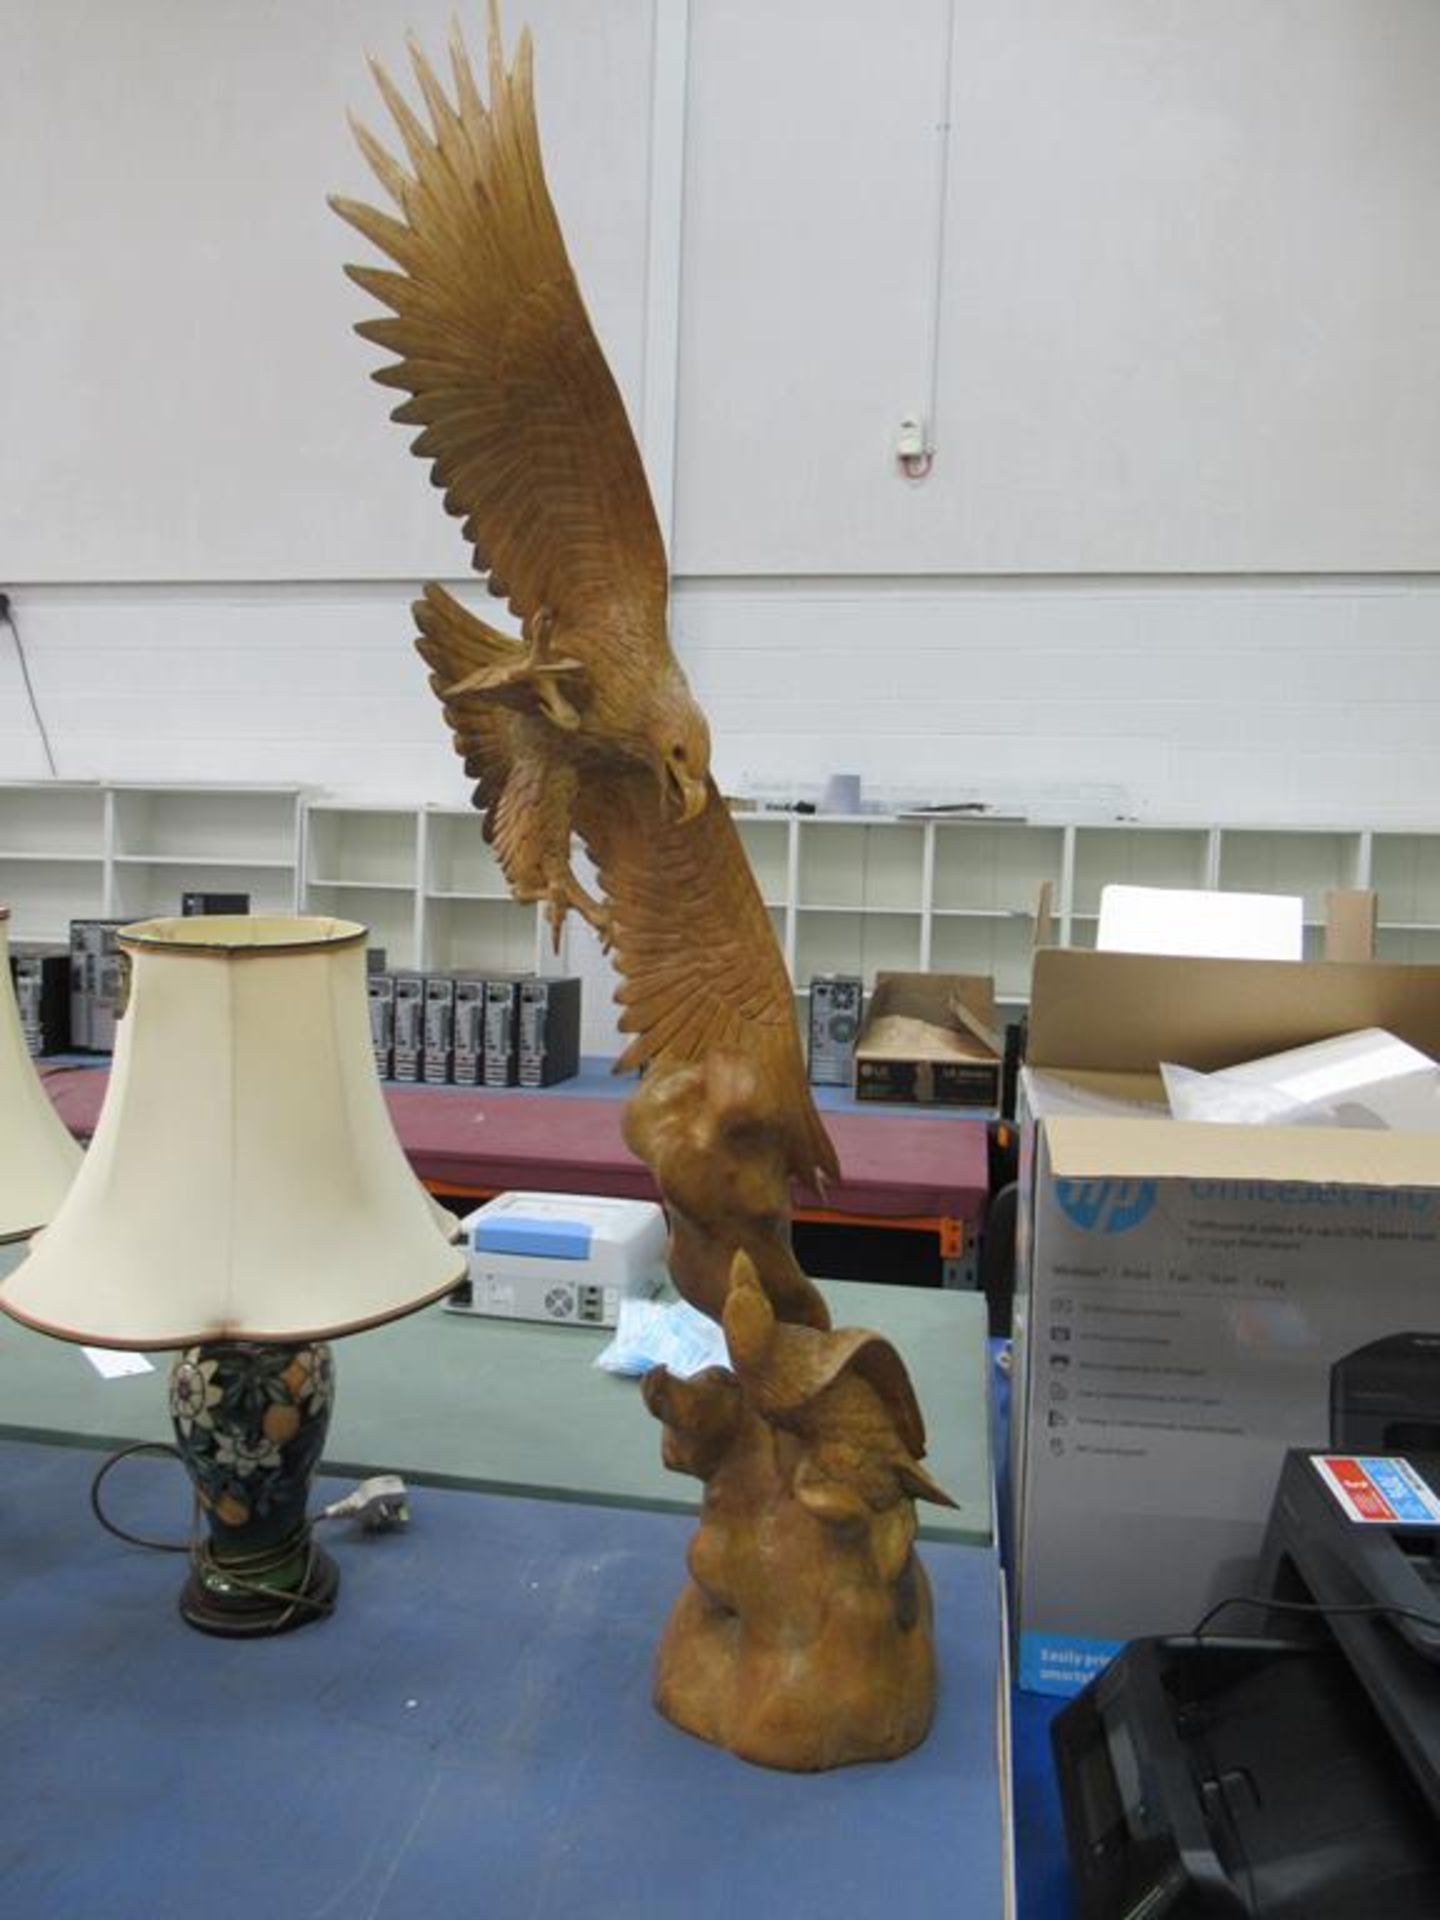 2x Carved Wooden Eagle Figures - 1x 4ft Tall - Image 5 of 16